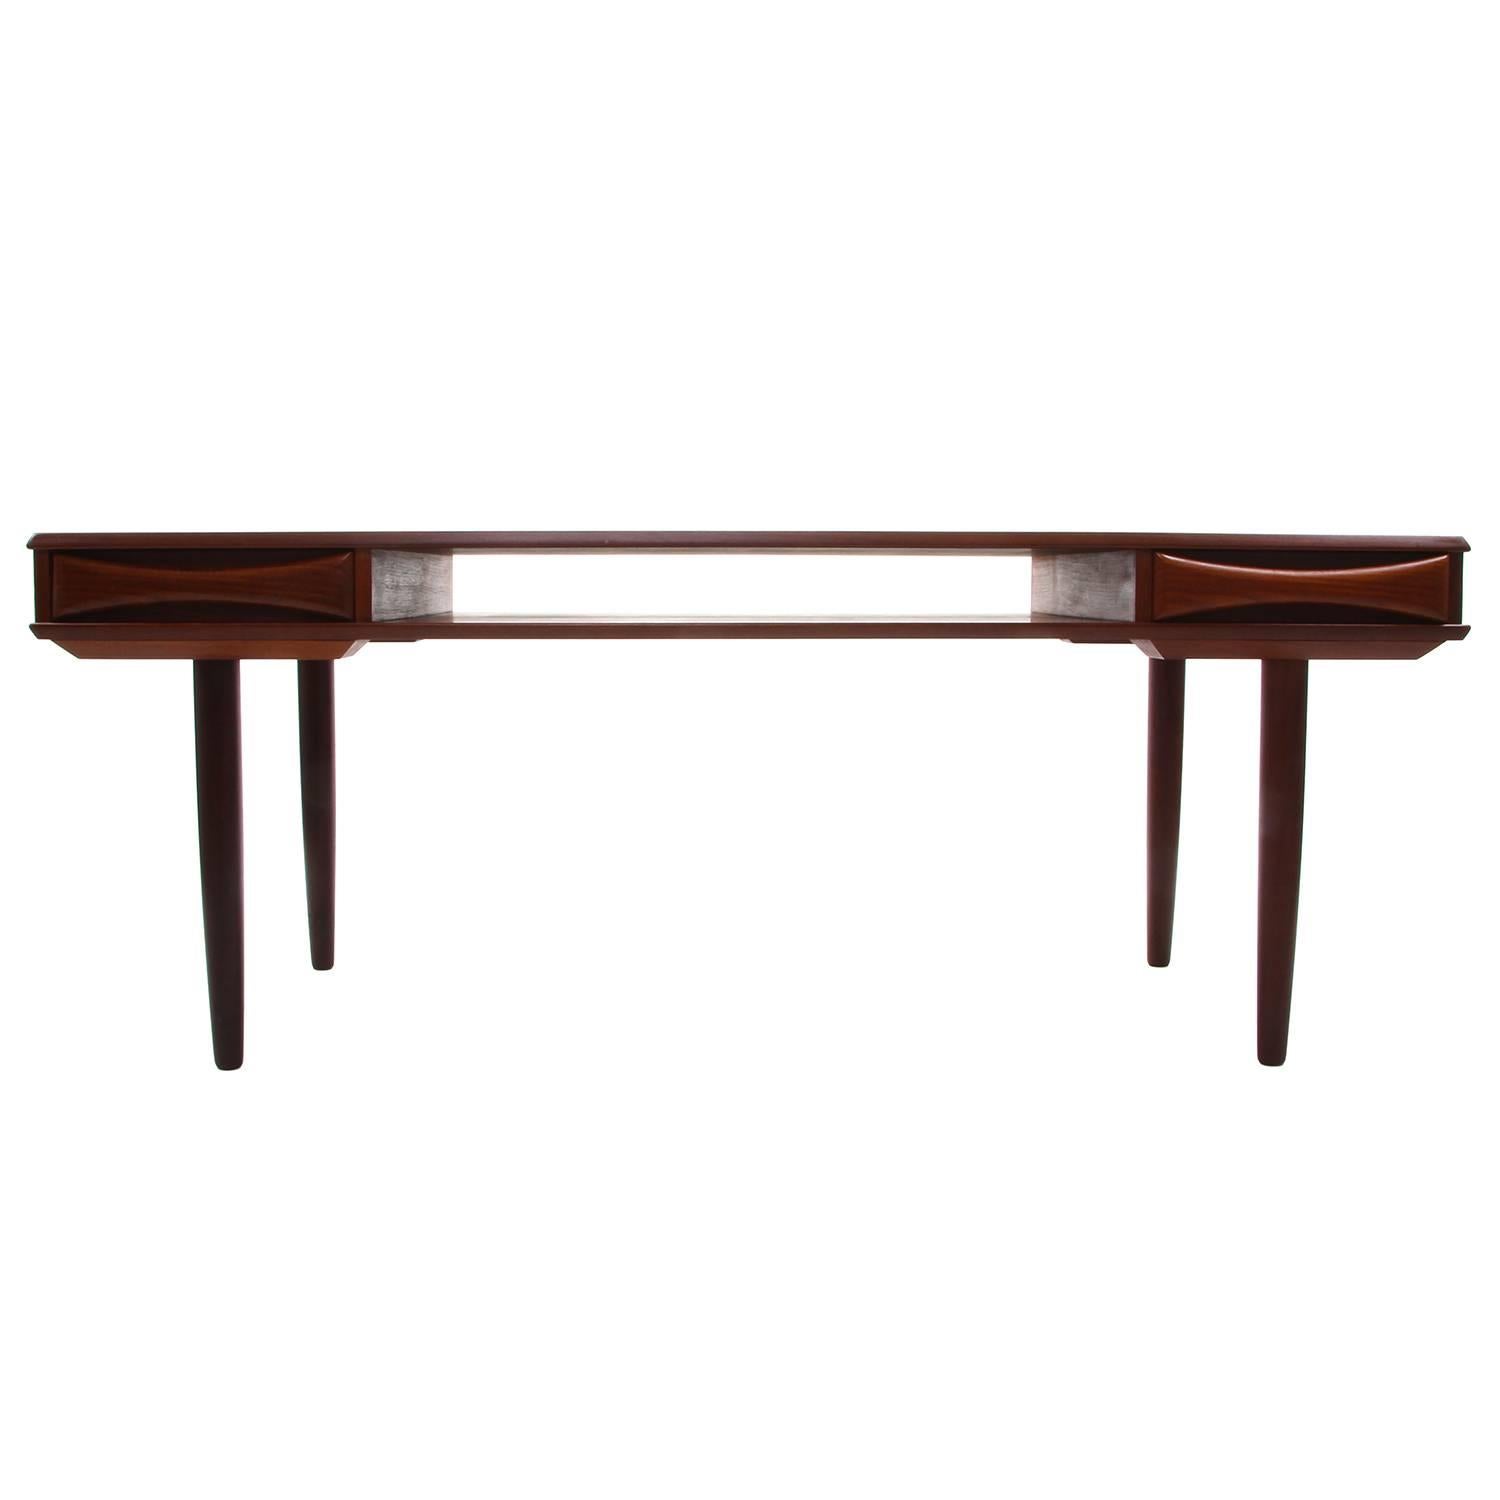 Teak coffee table by Danish furniture maker in the 1960s - beautiful Scandinavian Modern teak coffee table with shelf and two drawers, in very good vintage condition.

A gorgeous midcentury piece, crafted in teak, rich in color and proudly showing